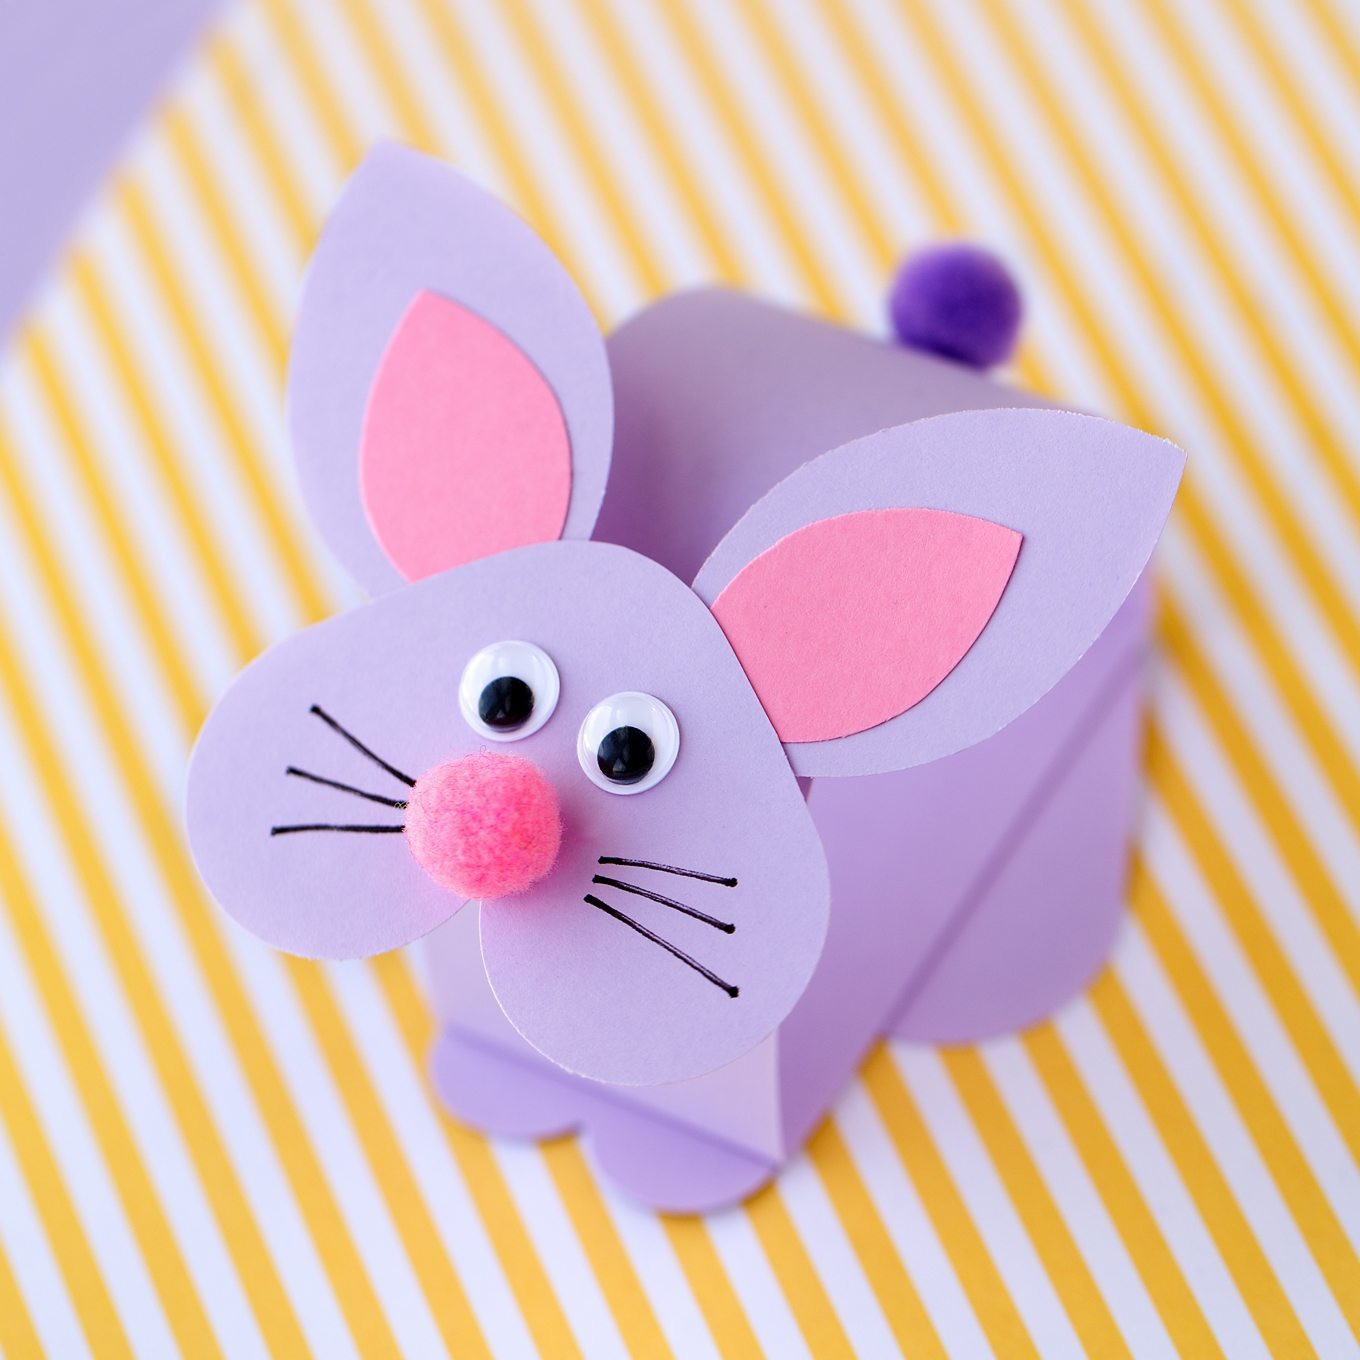 Construction Paper Easter Crafts
 Paper Bobble Head Bunny Craft for Kids